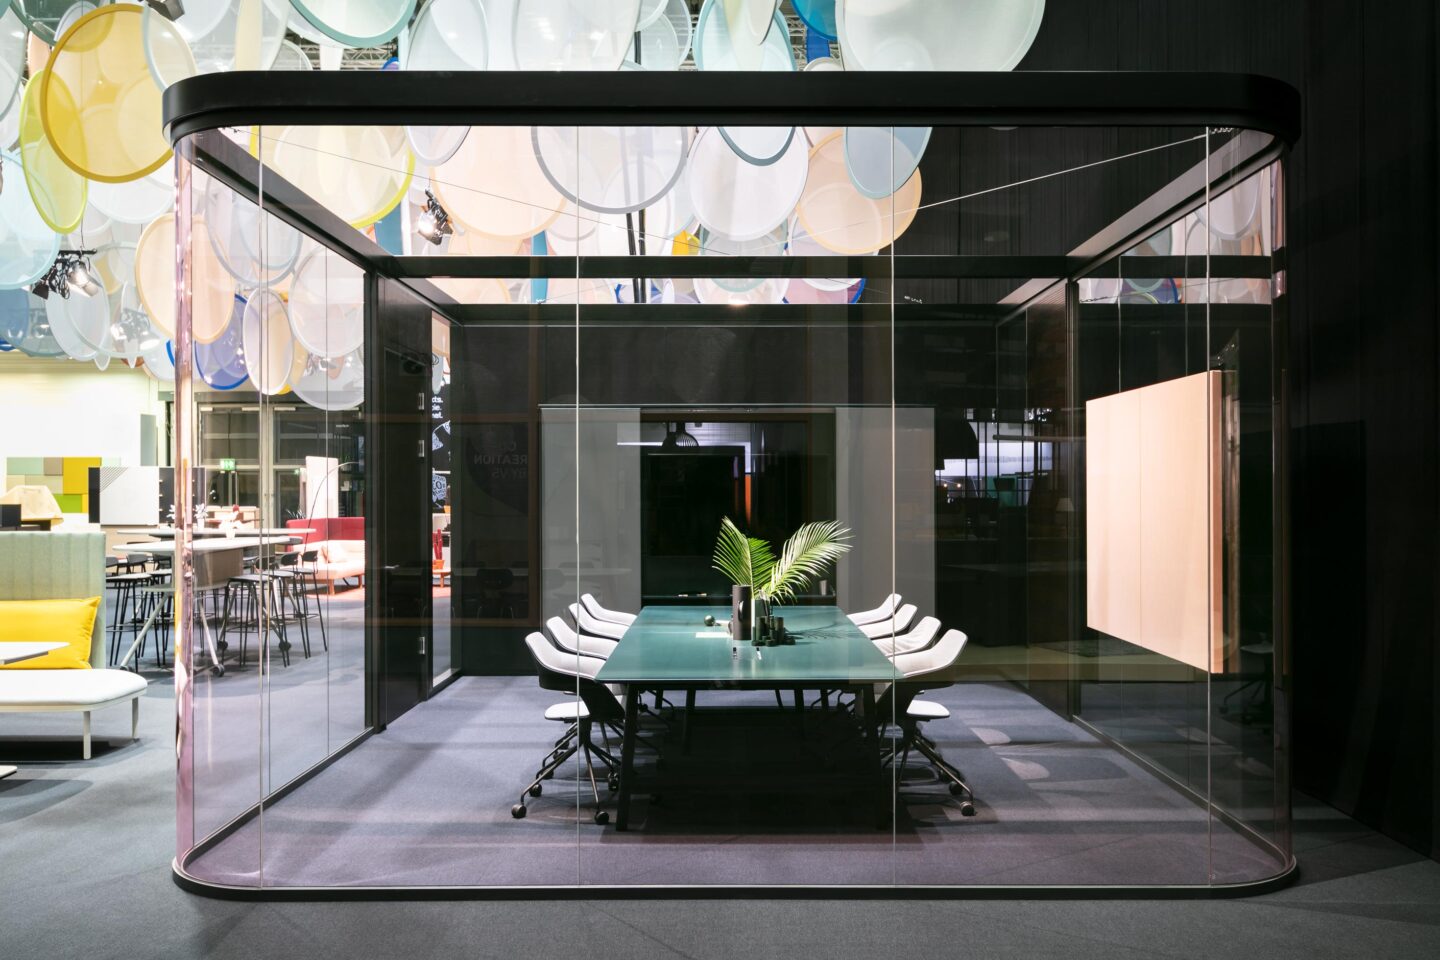 ORGATEC 2018 │ ophelis showcases feco system walls │ all-glass construction │ meeting rooms